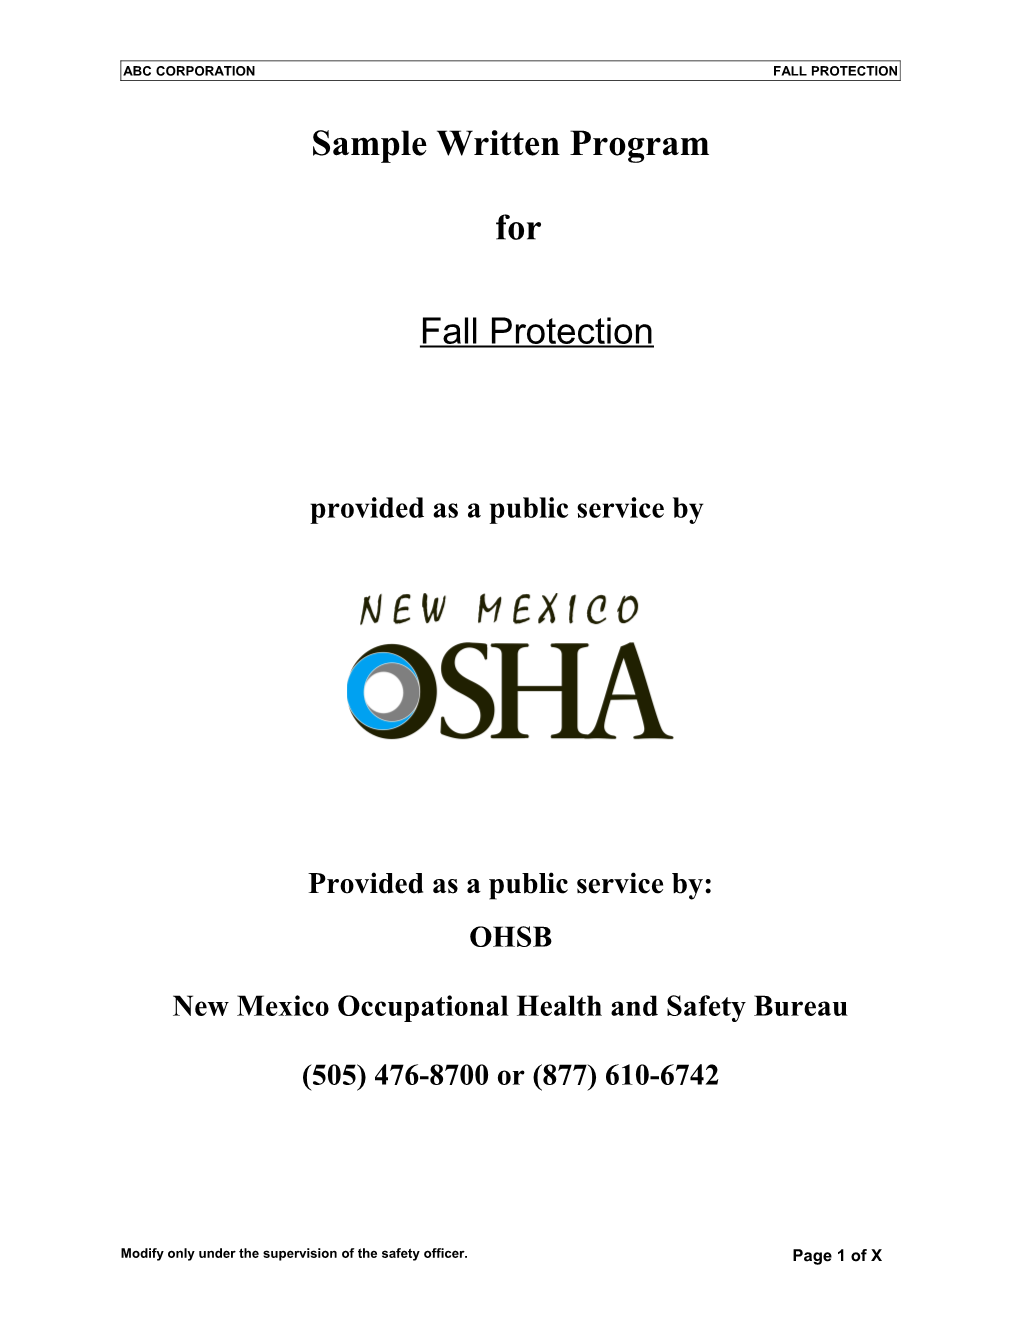 ABC Corporation Occupational Health And Safety Program